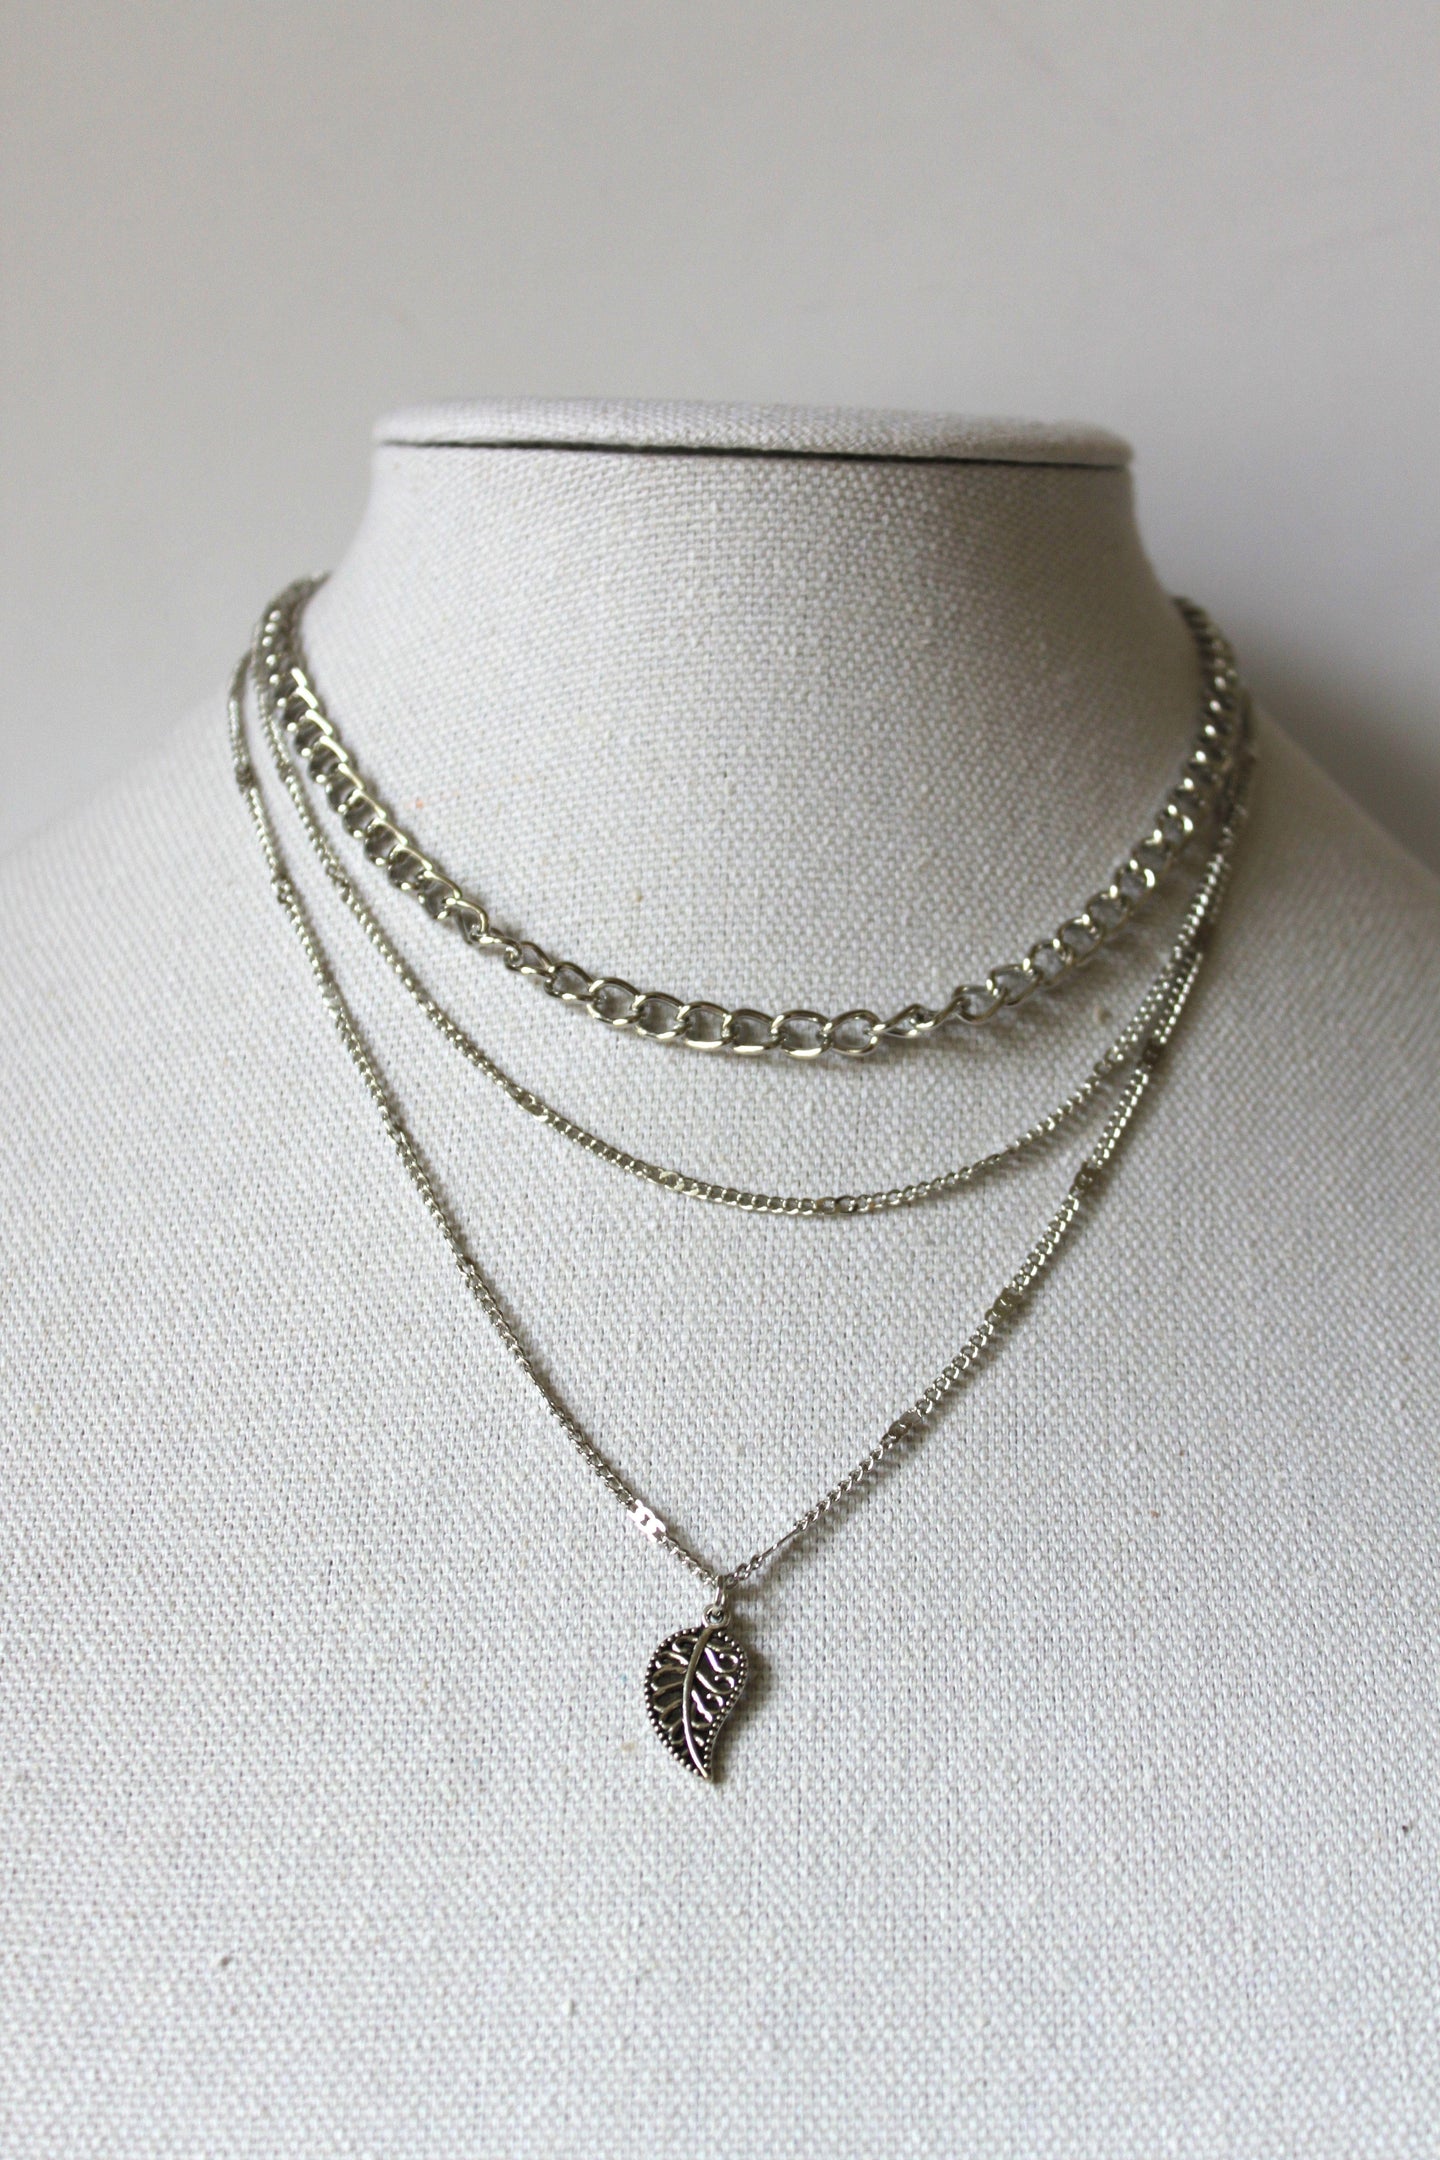 Necklace - 3-layered silver-plate, cube and cable chain designs - 15.5